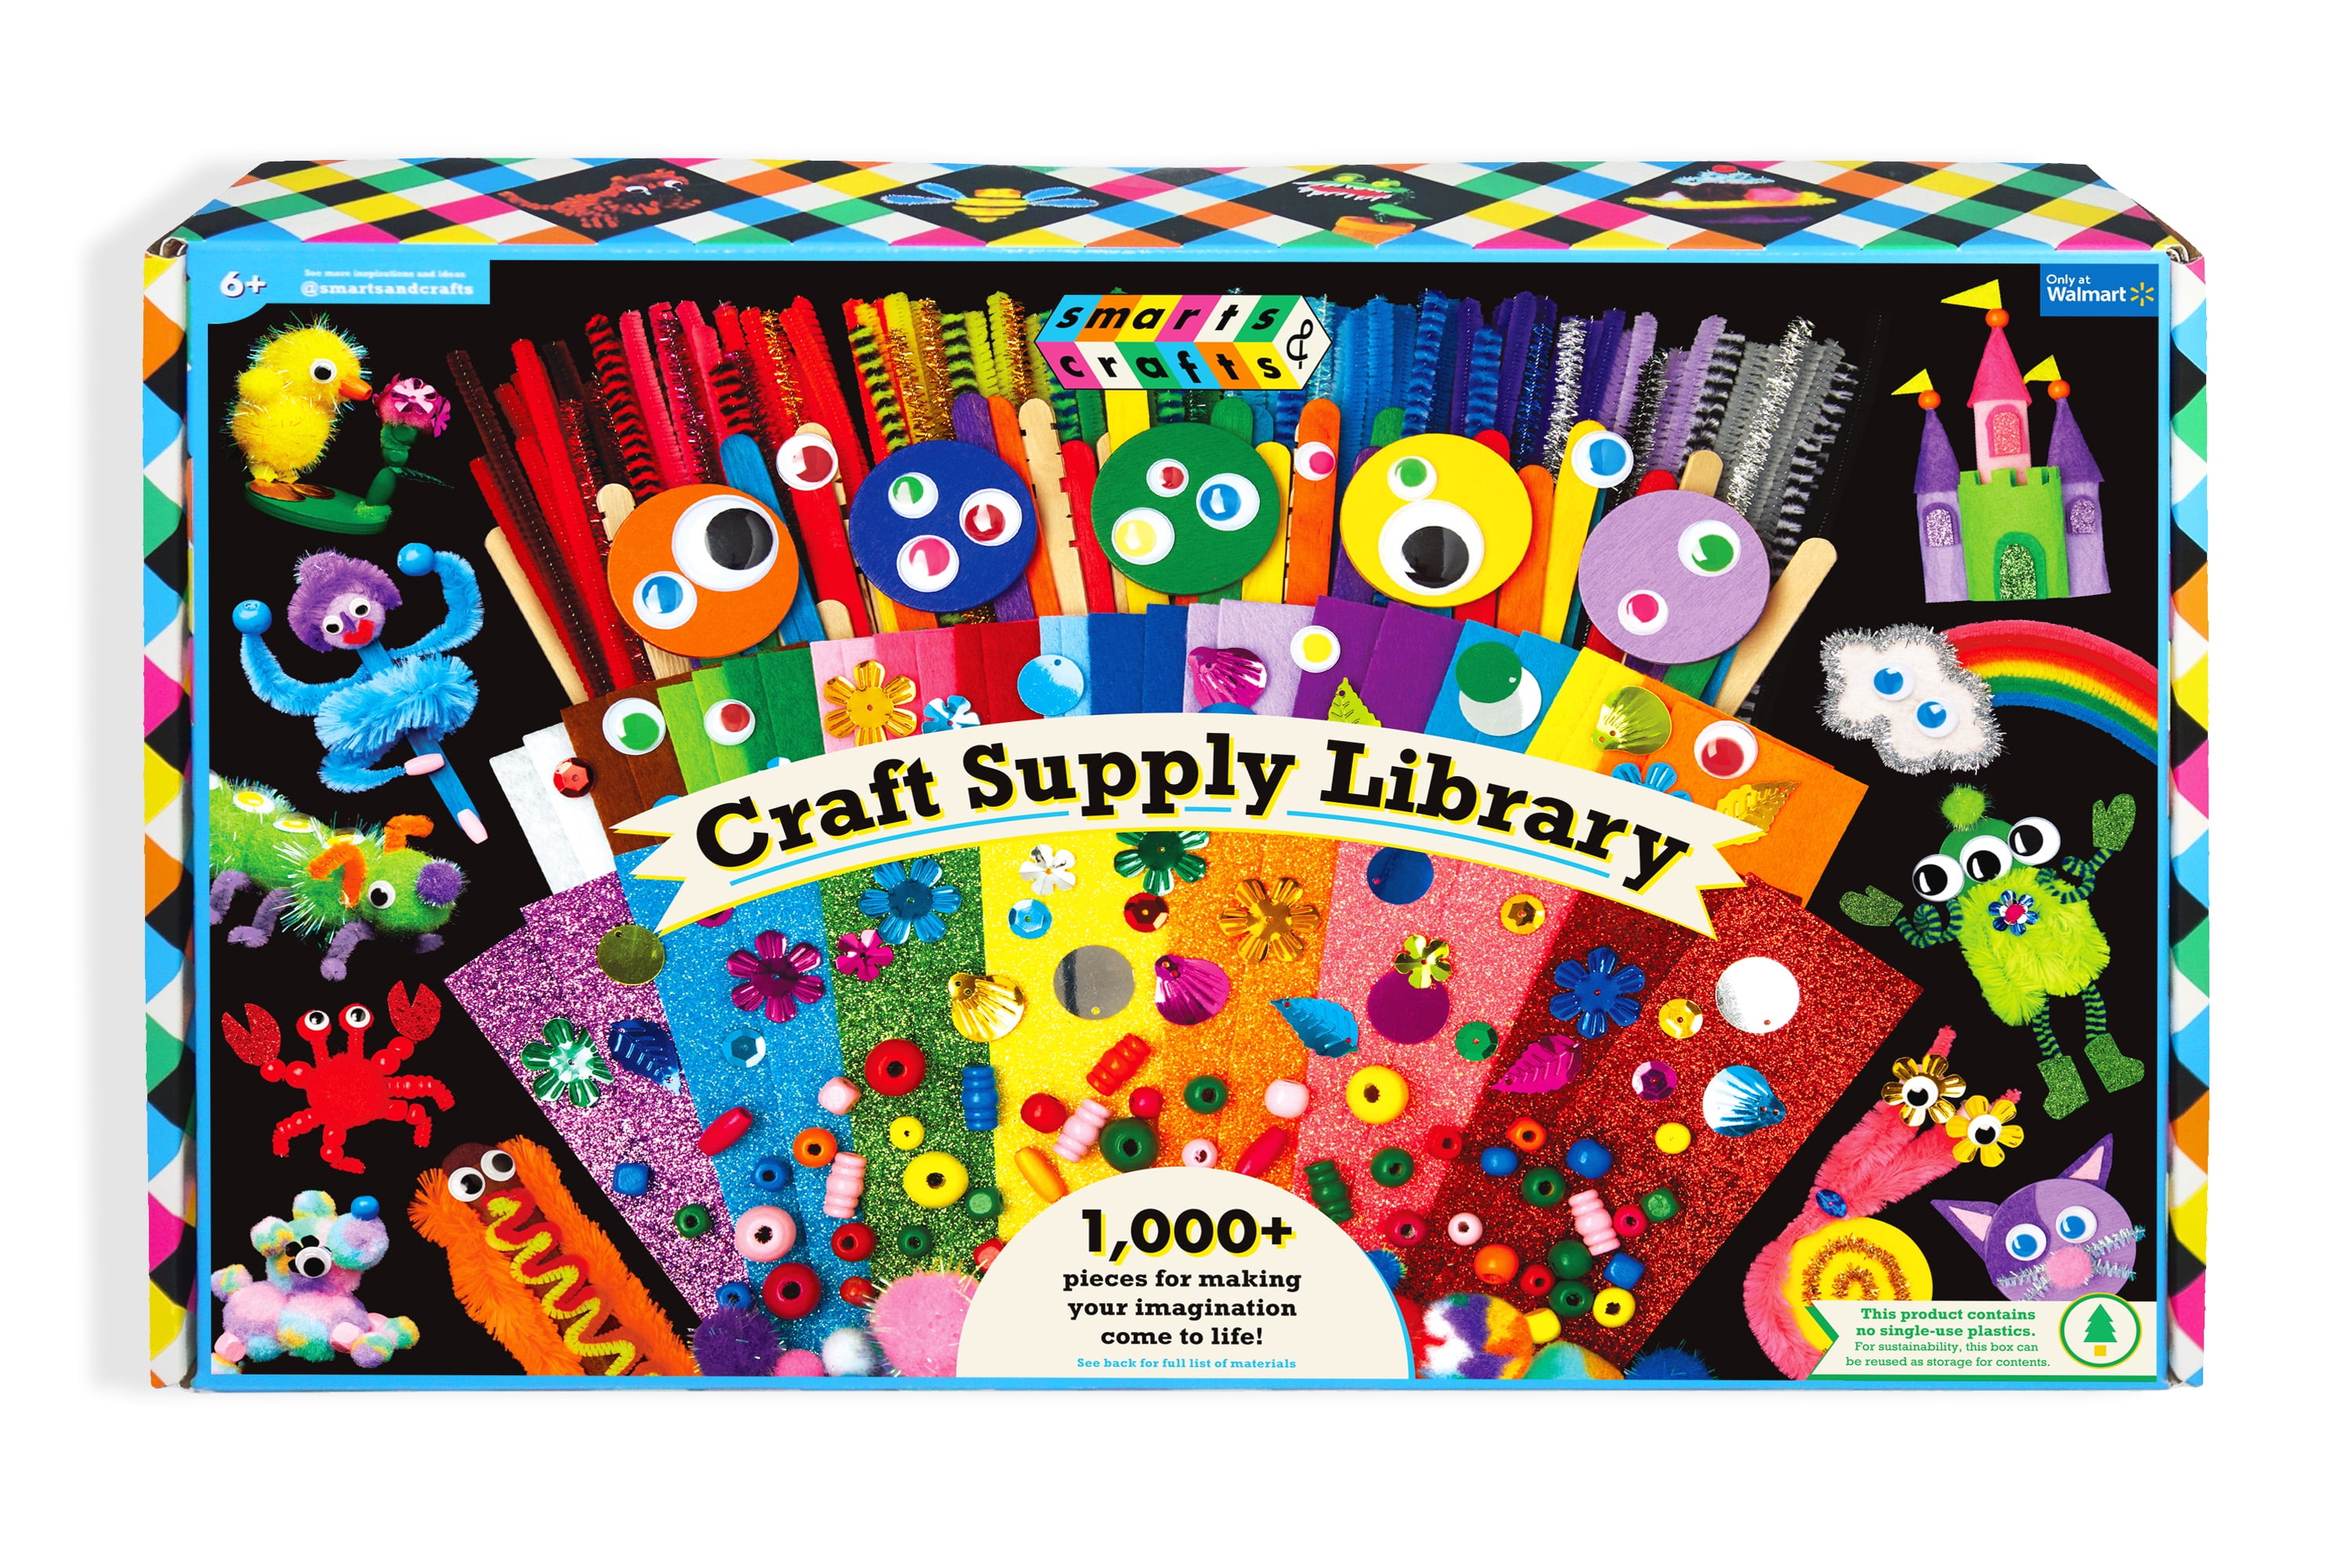 Kids Arts and Crafts Library